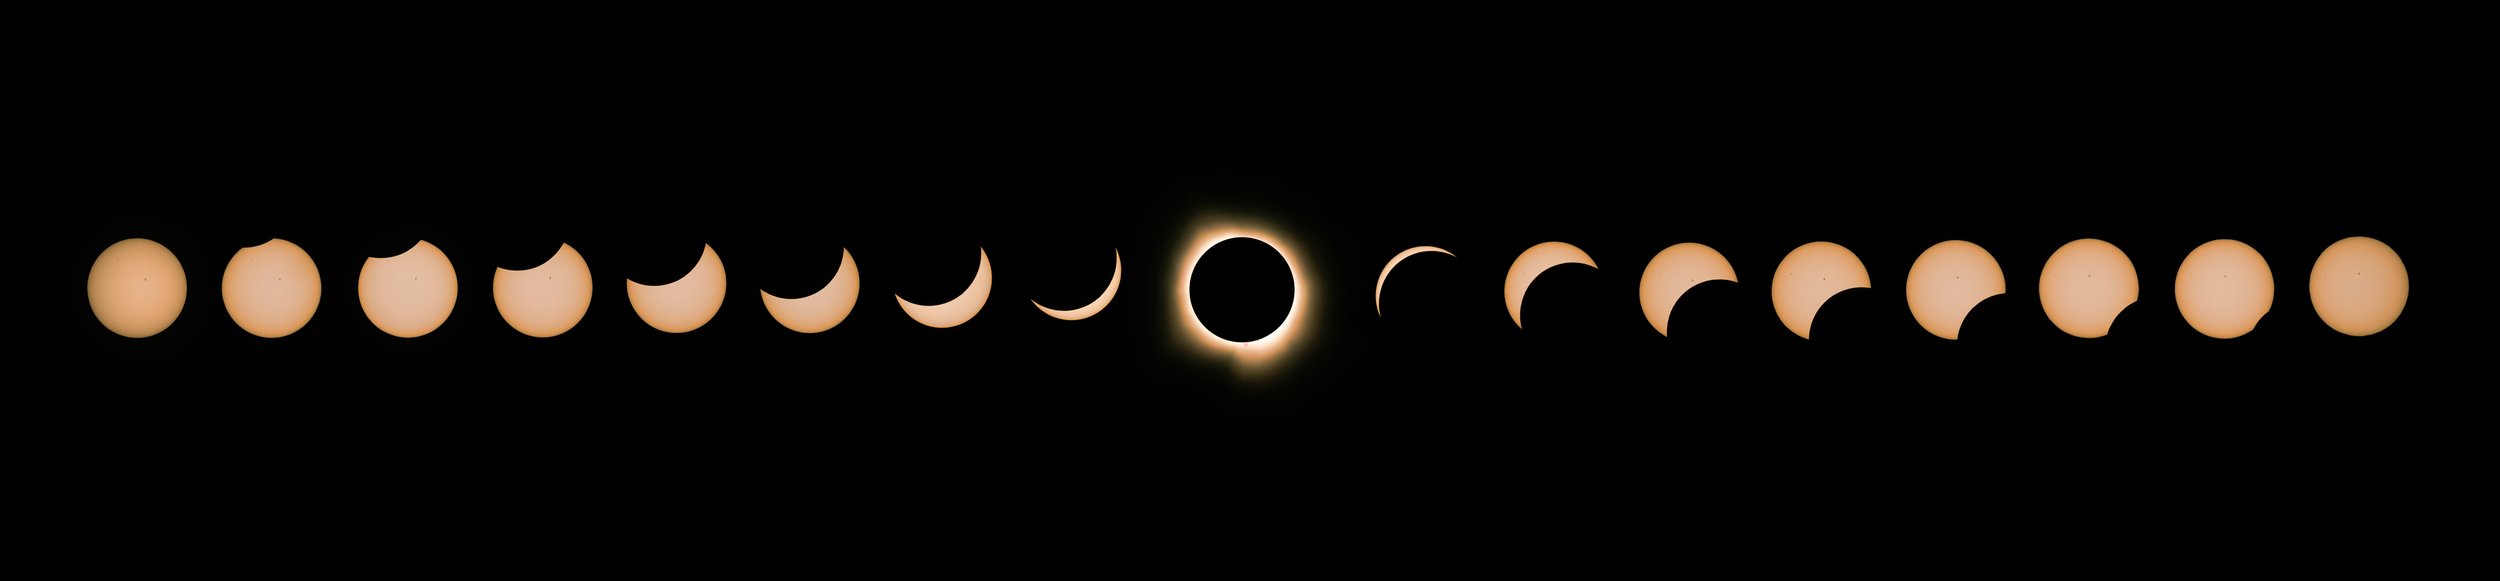 solar eclipse done for website 2 (1 of 1)-8.jpg